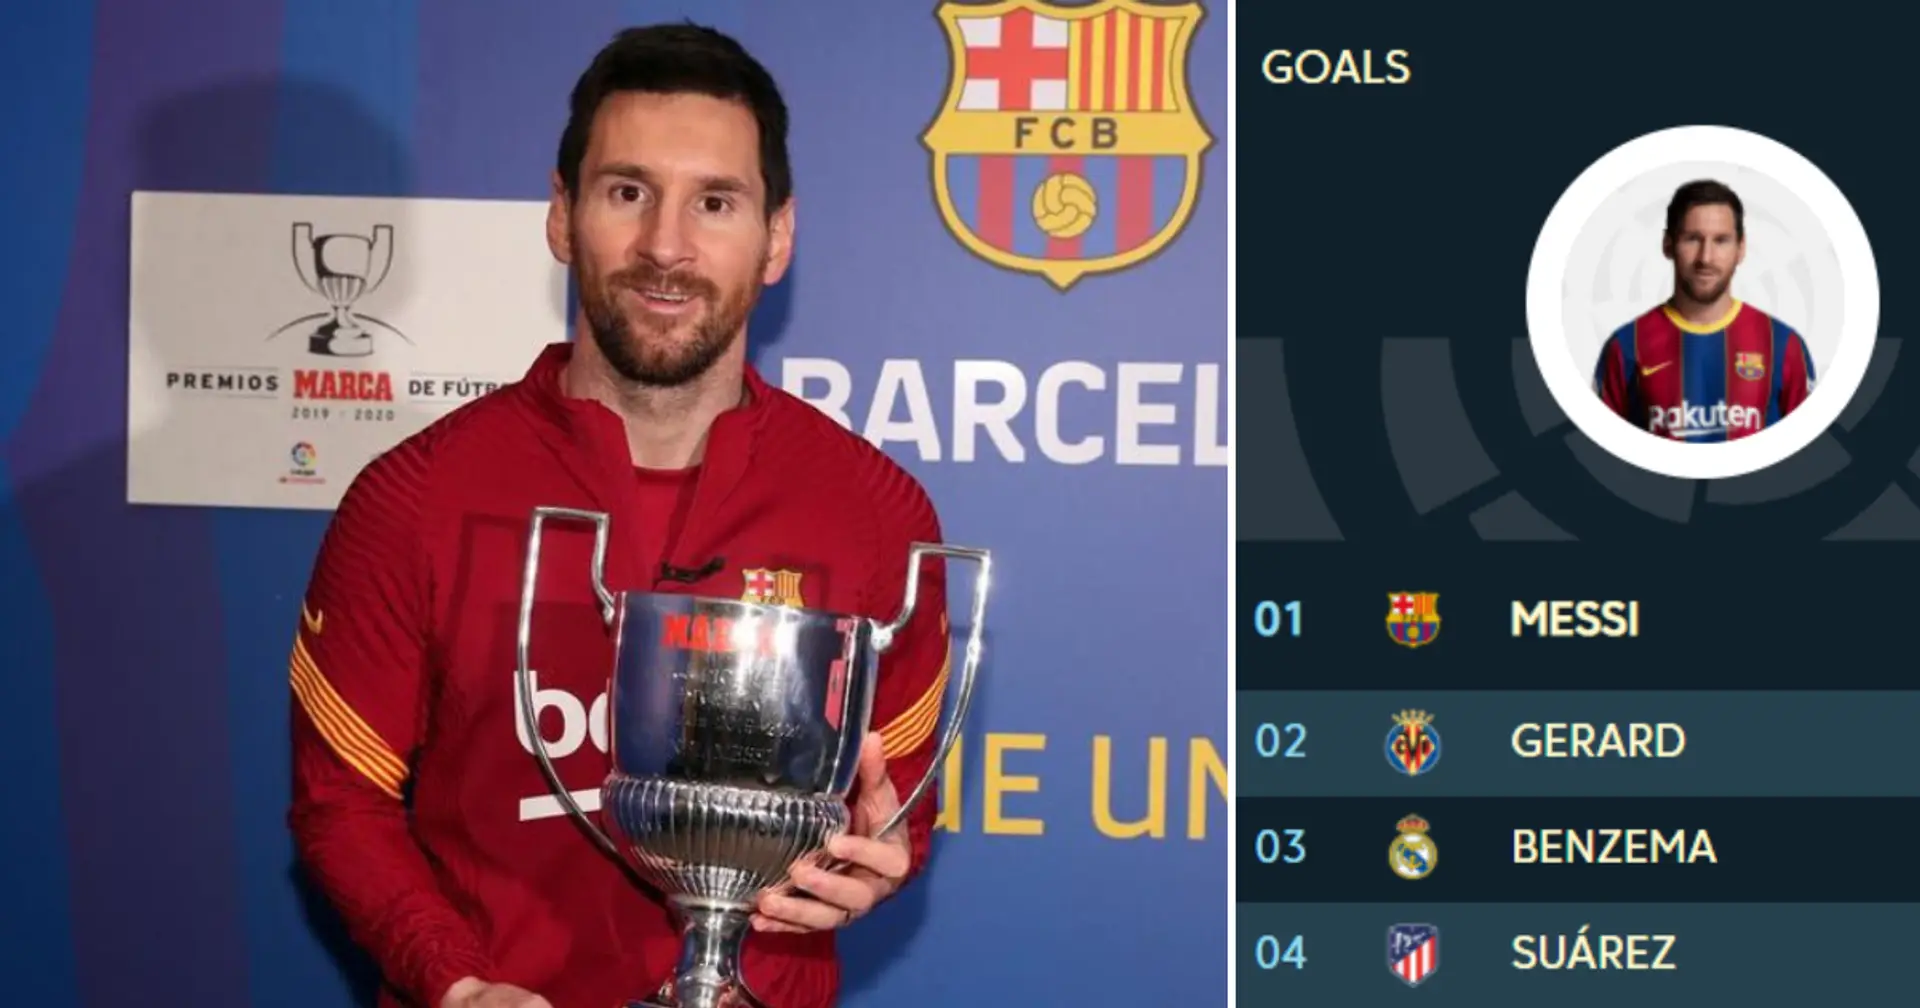 OFFICIAL: Messi wins 2020/21 Pichichi Trophy